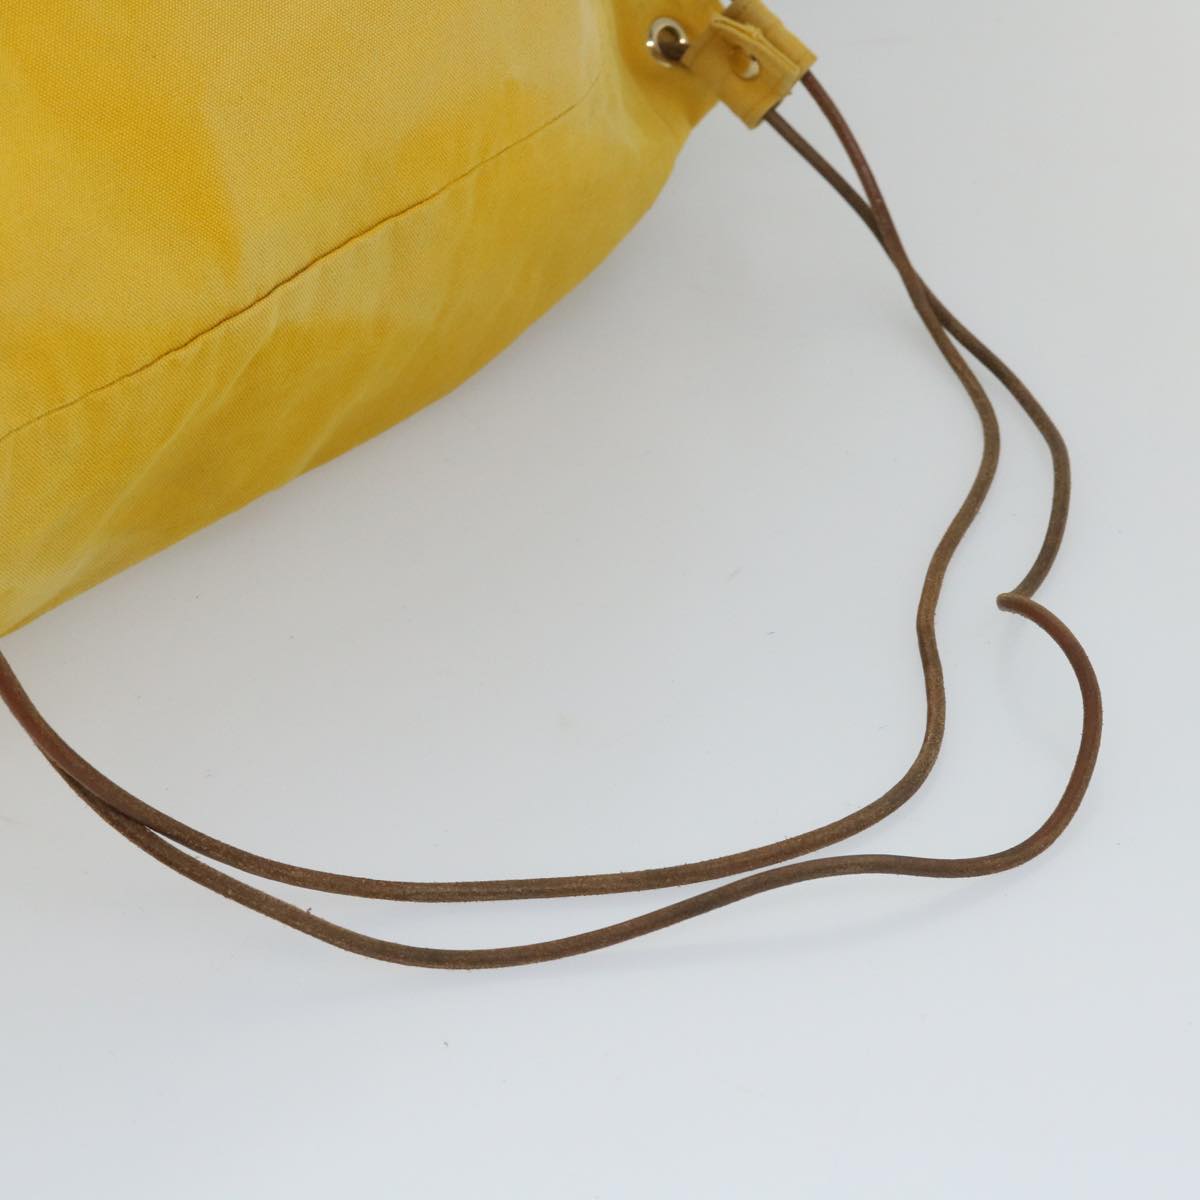 HERMES Shoulder Bag Canvas Yellow Auth bs9233